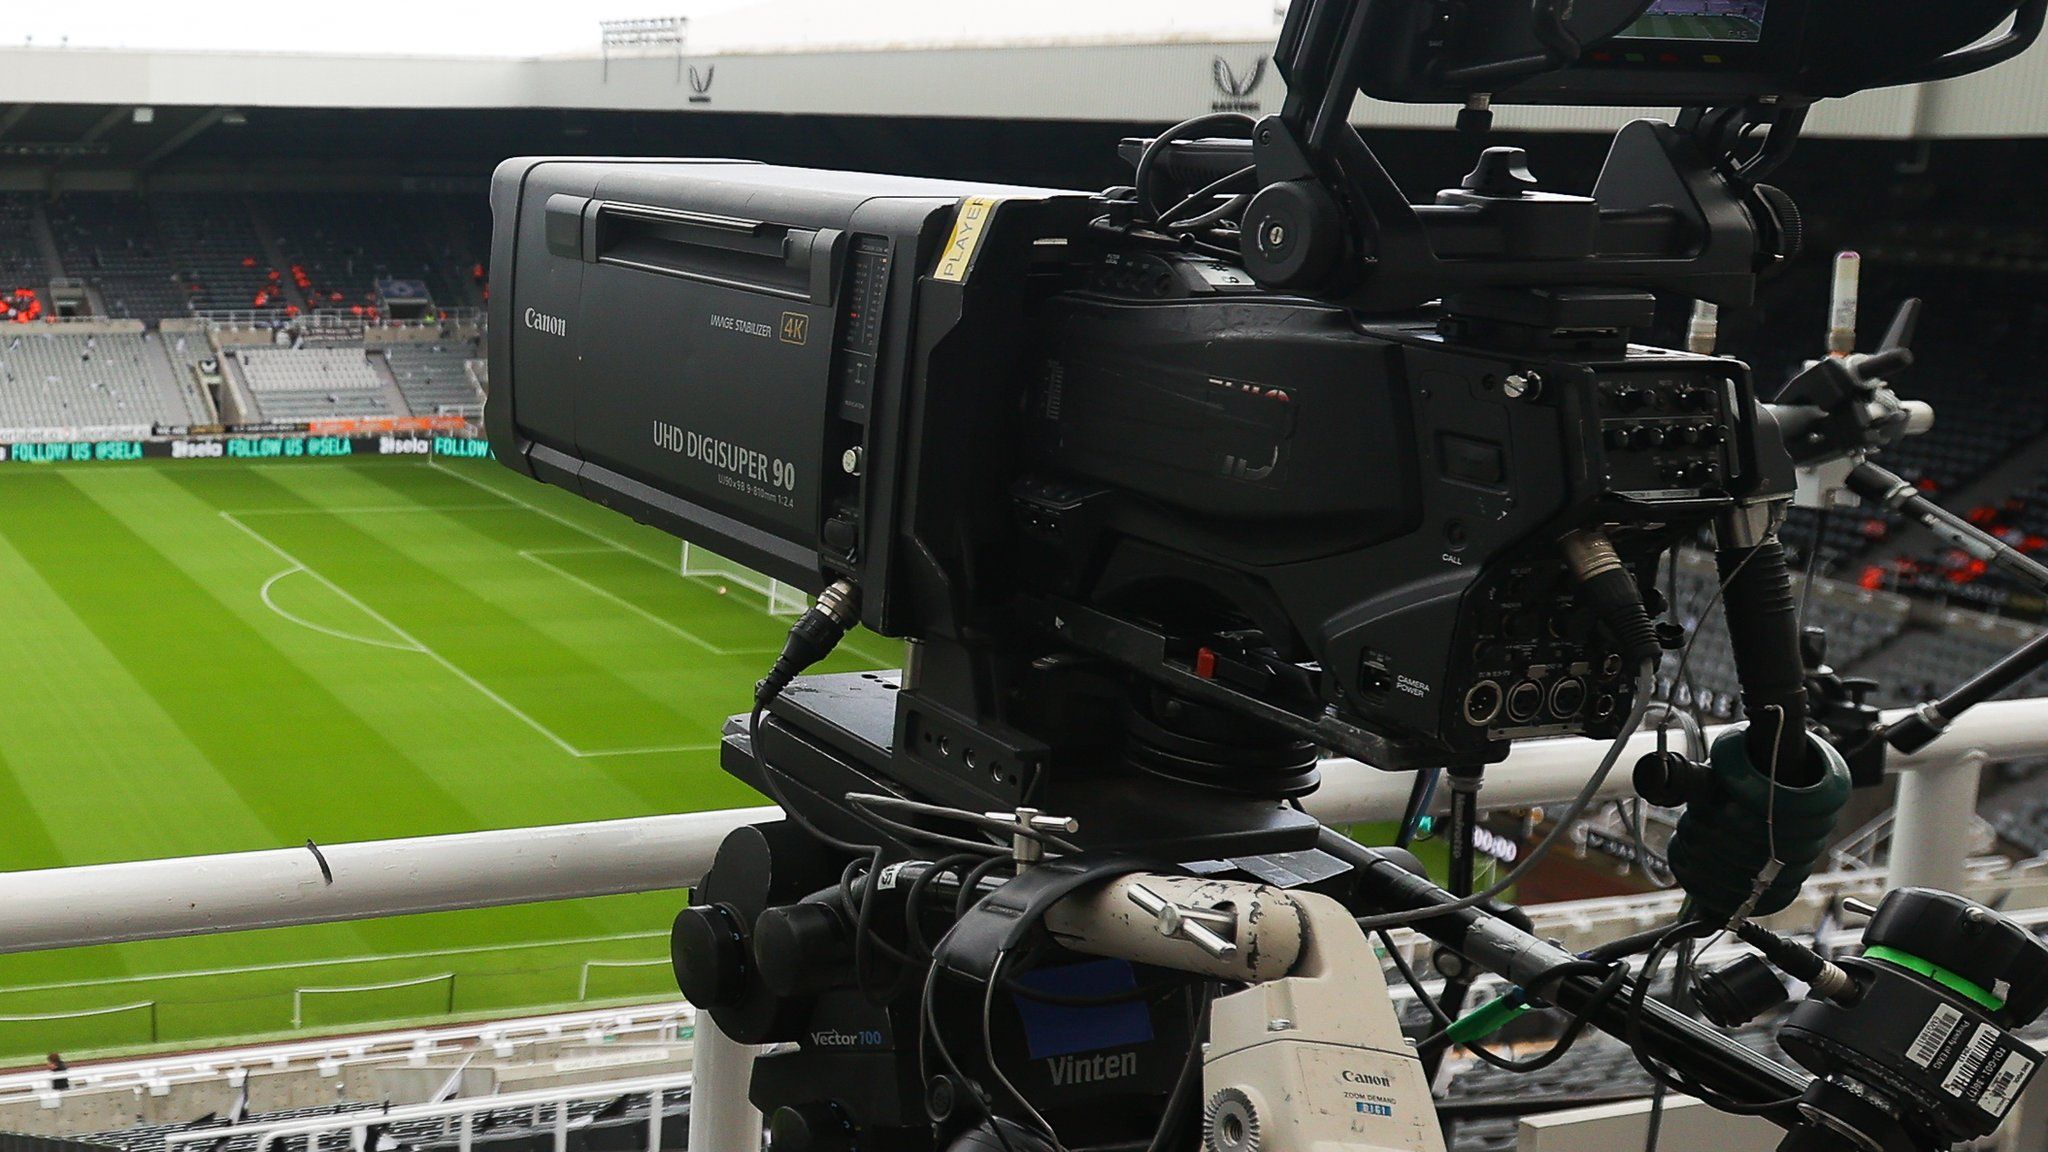 A TV camera at Newcastle's St James' Park